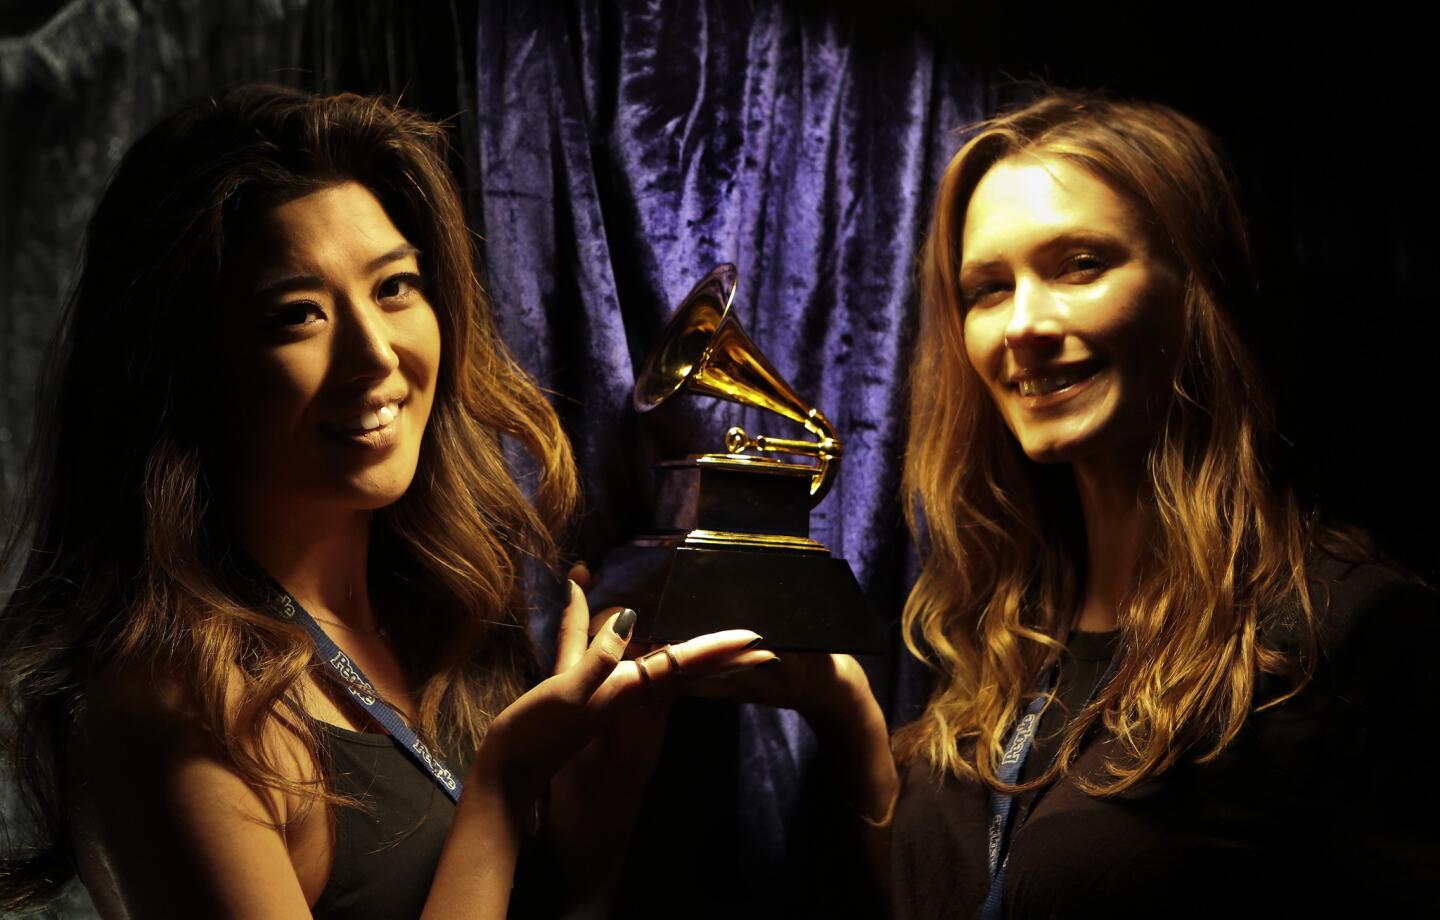 Jennifer Lee, left, and Kyna Treacy, trophy presenters for the Grammy Awards, at Staples Center on Friday.